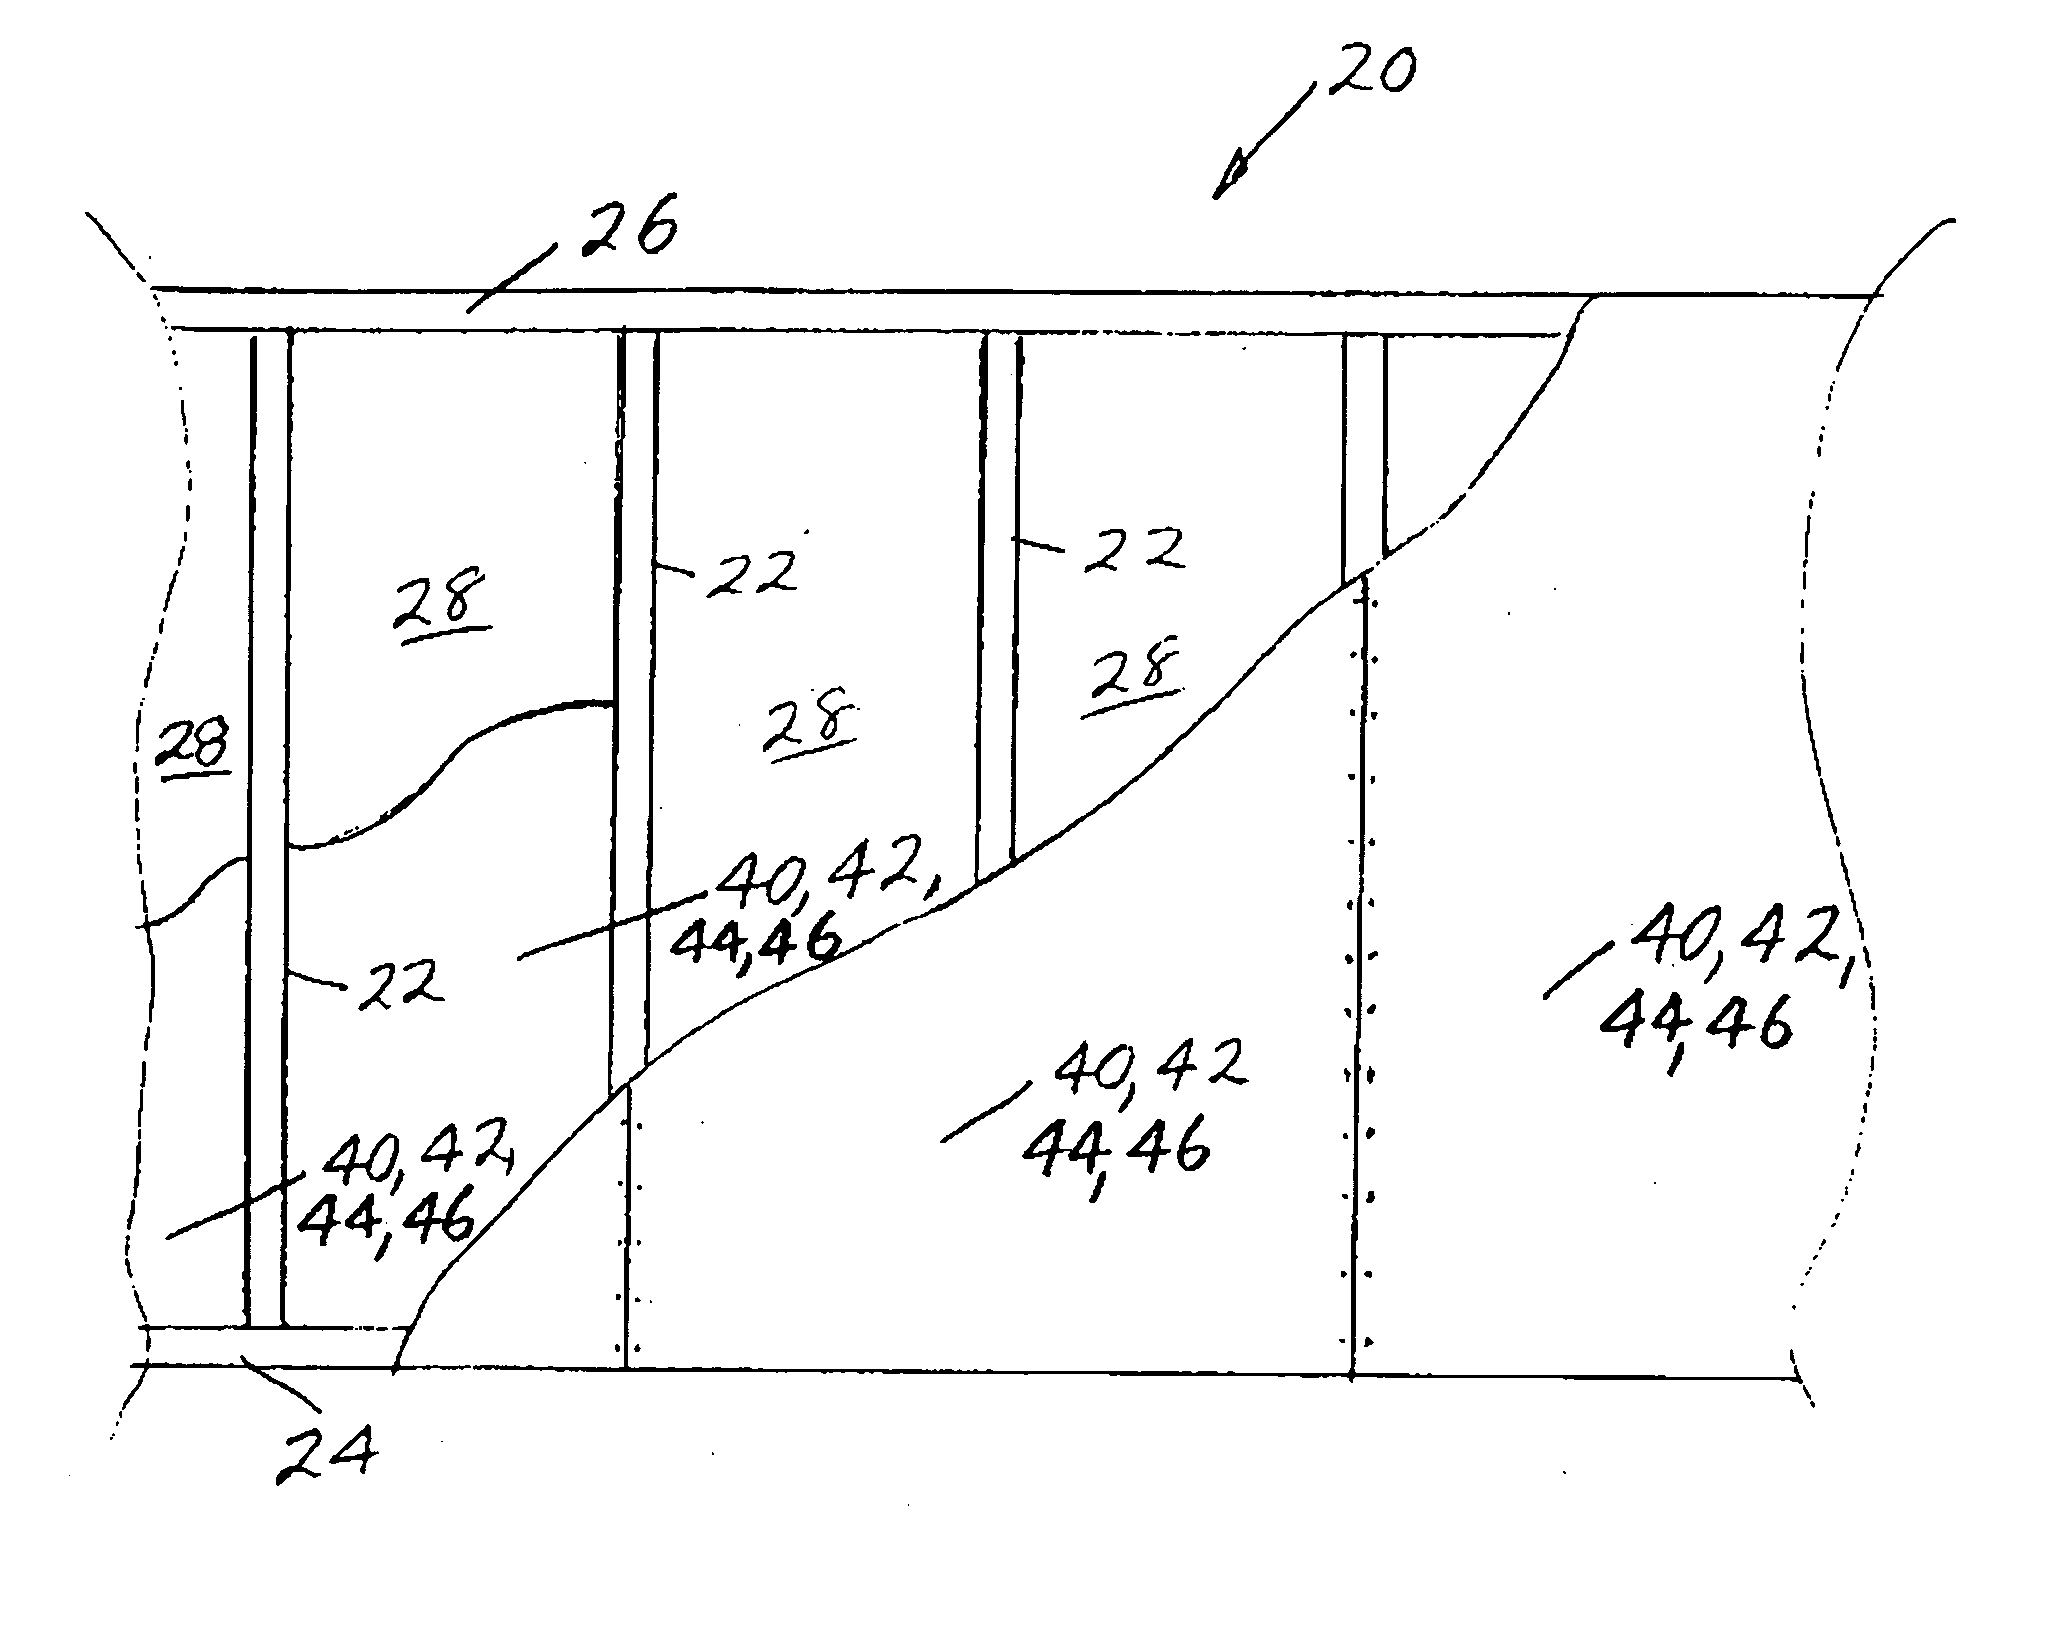 Polymer-based composite structural sheathing board and wall and/or ceilling system